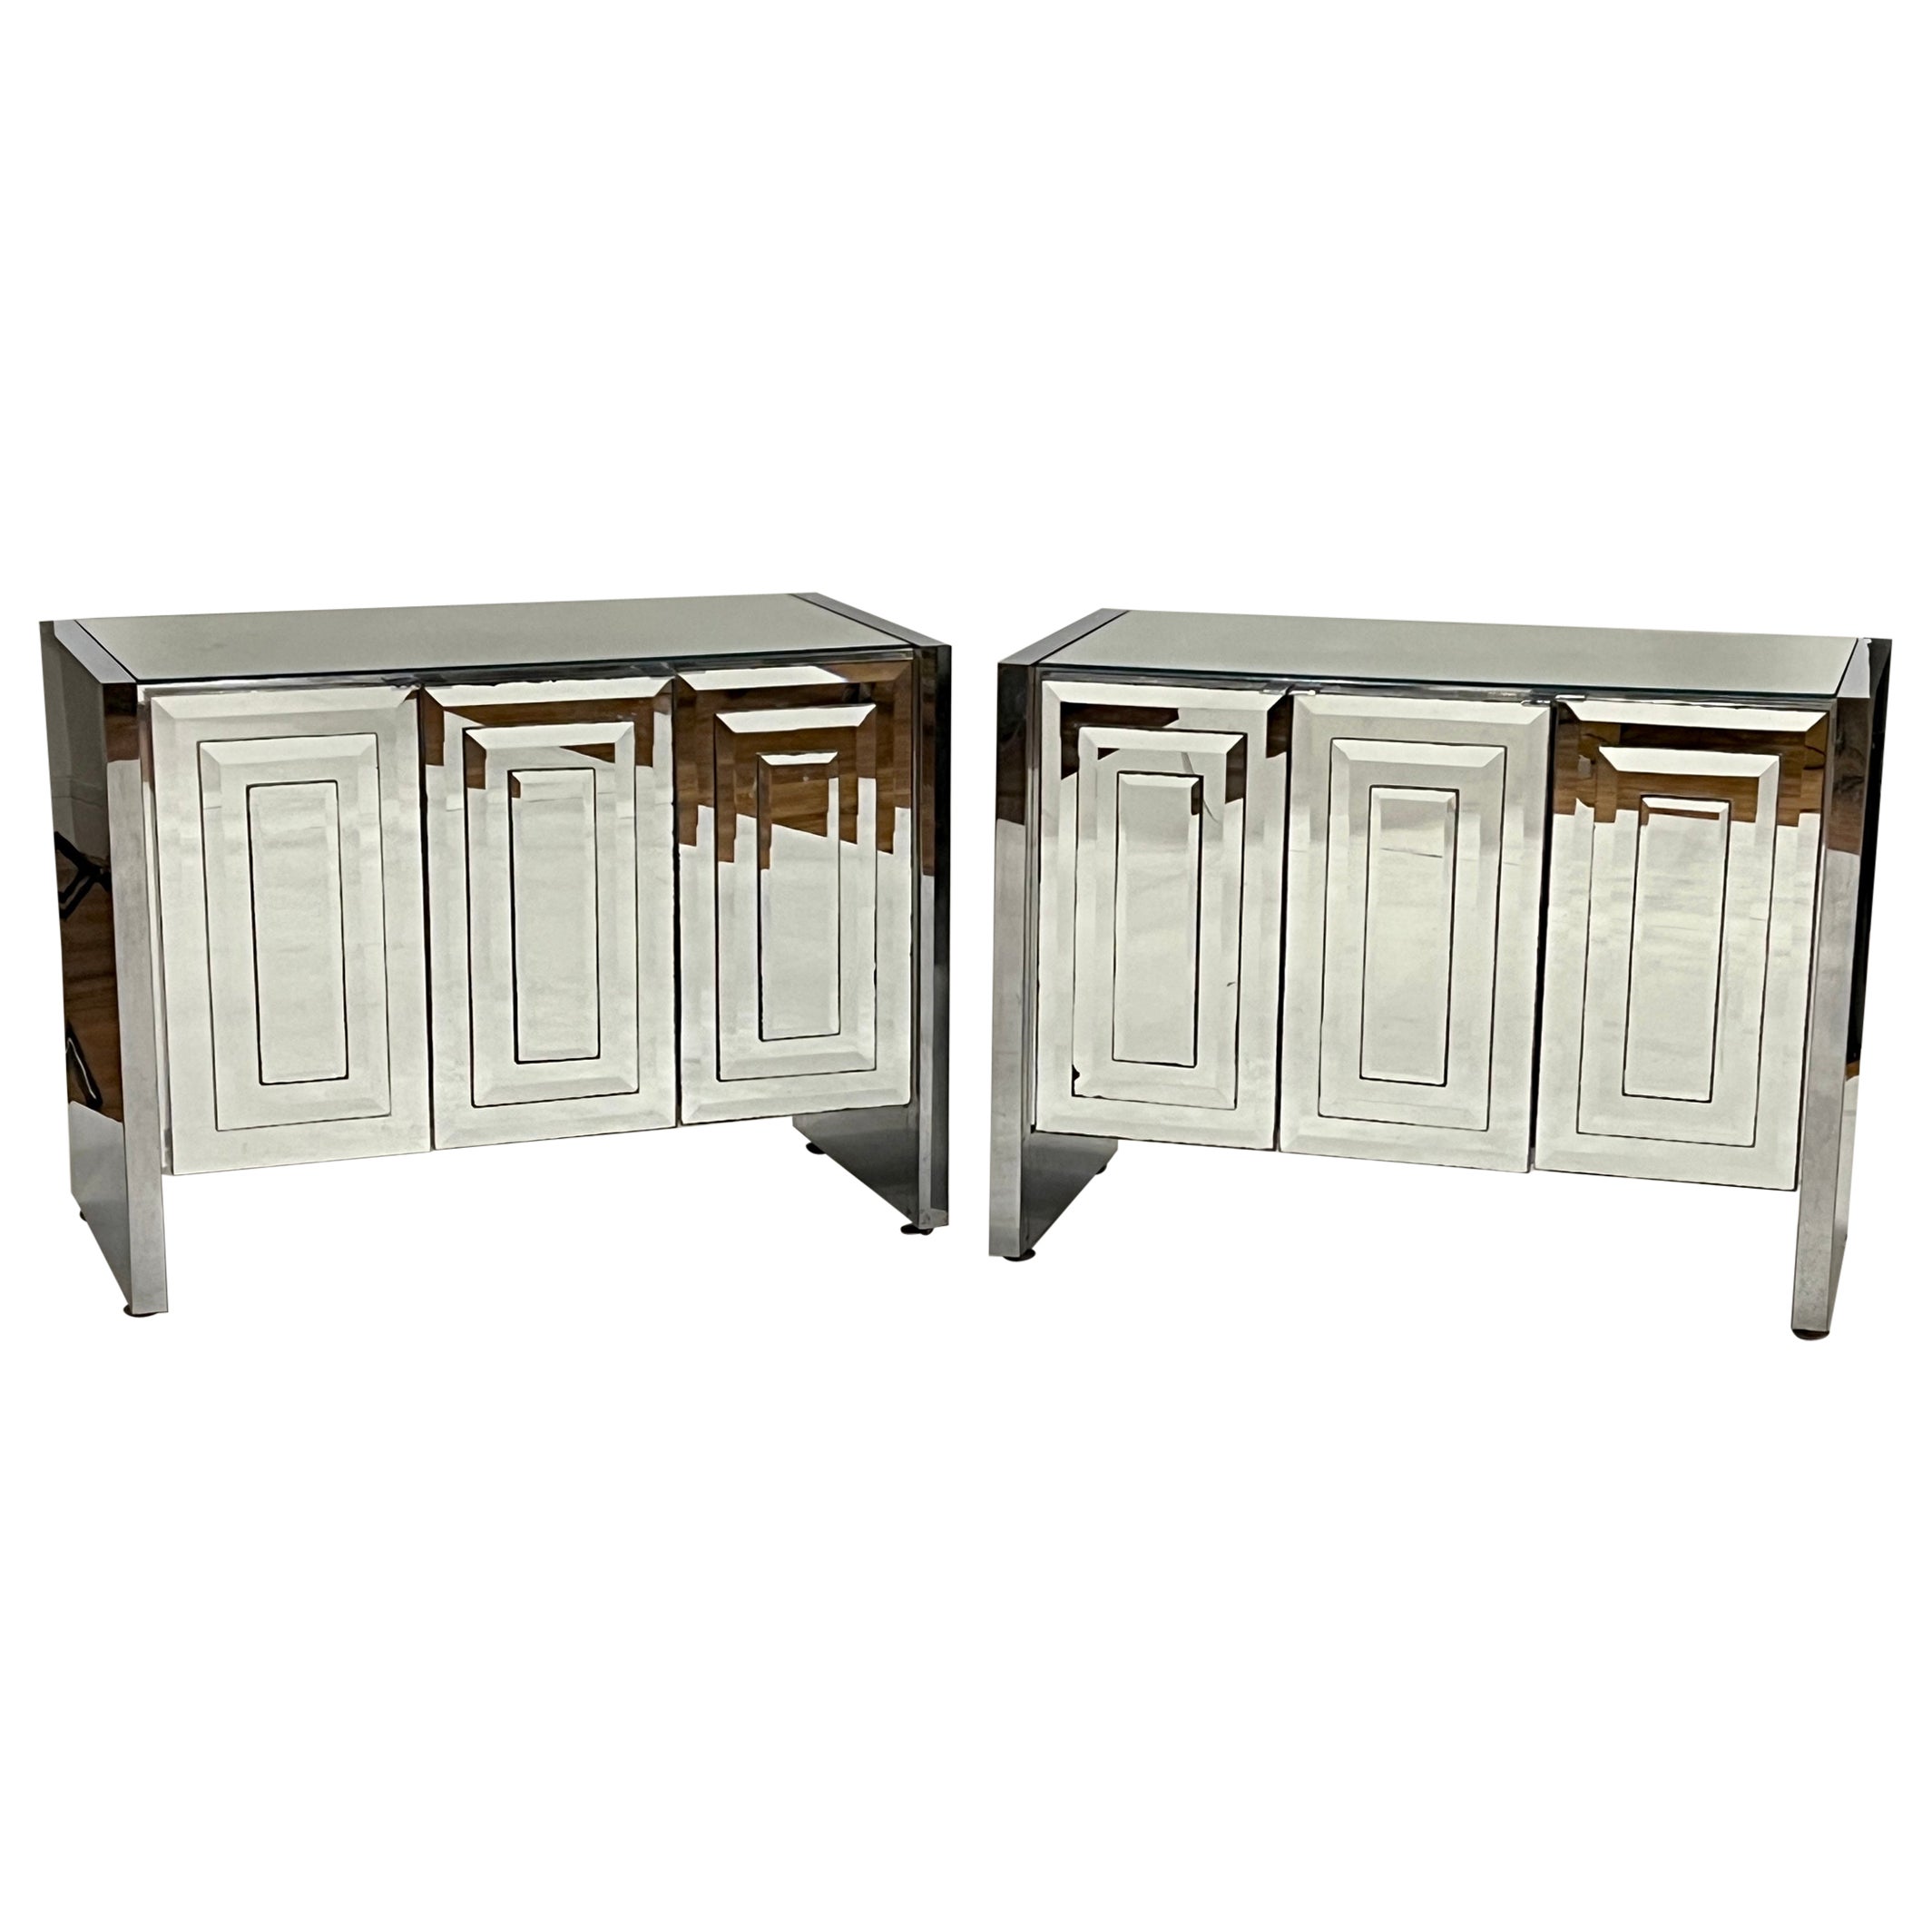 Pair of Mirrored Chests of Drawers or Nightstands by Ello